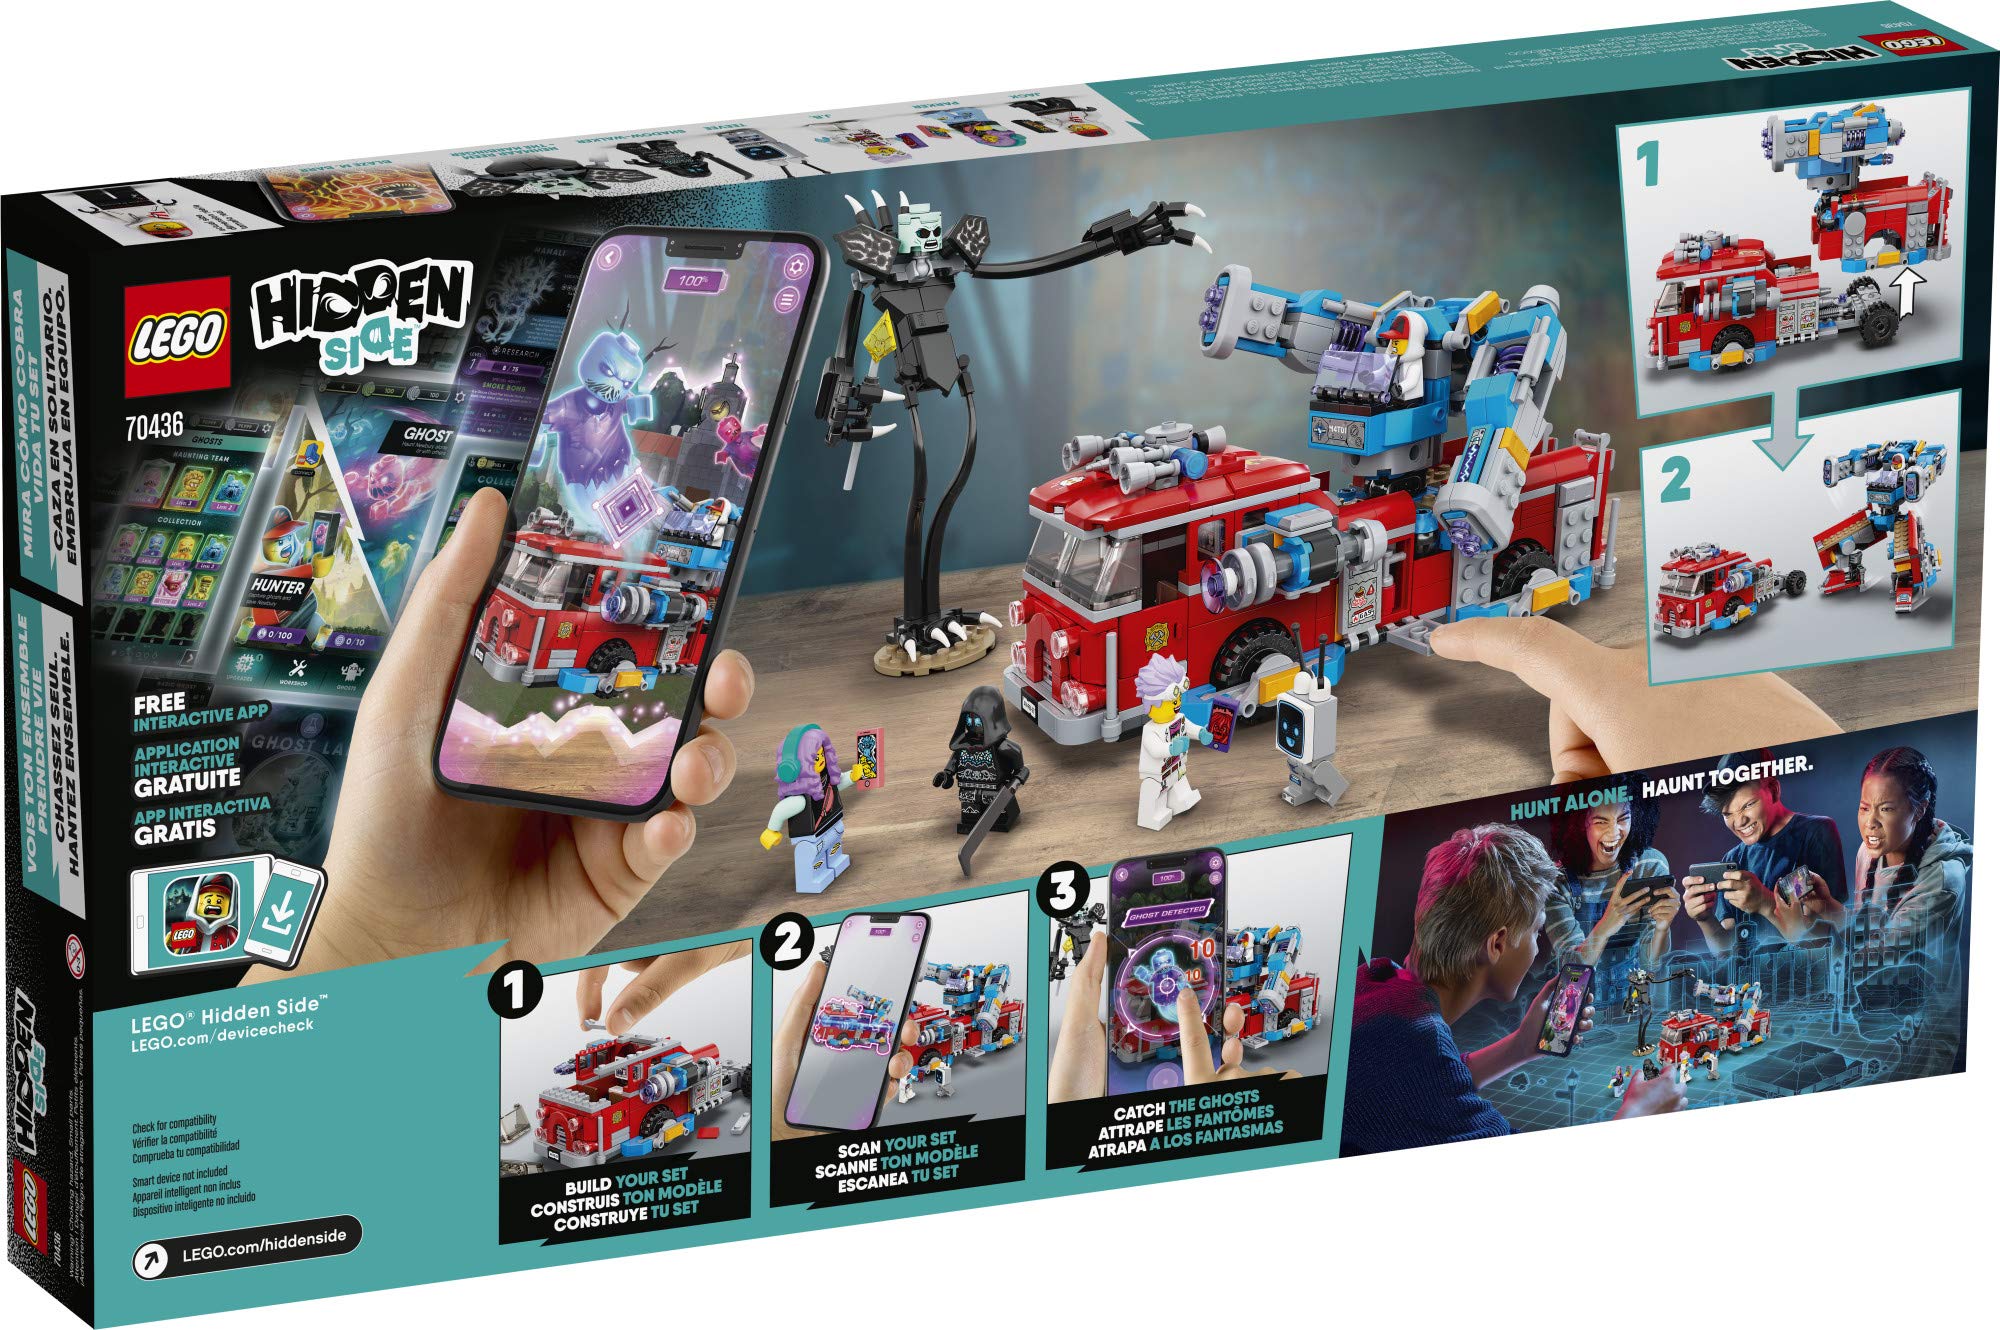 LEGO Hidden Side Phantom Fire Truck 3000 70436, Augmented Reality (AR) Fire Truck Toy, App-Driven Ghost-Hunting Kit, Includes a Mecha Robot, 5 Minifigures and a Harbinger Figure (760 Pieces)